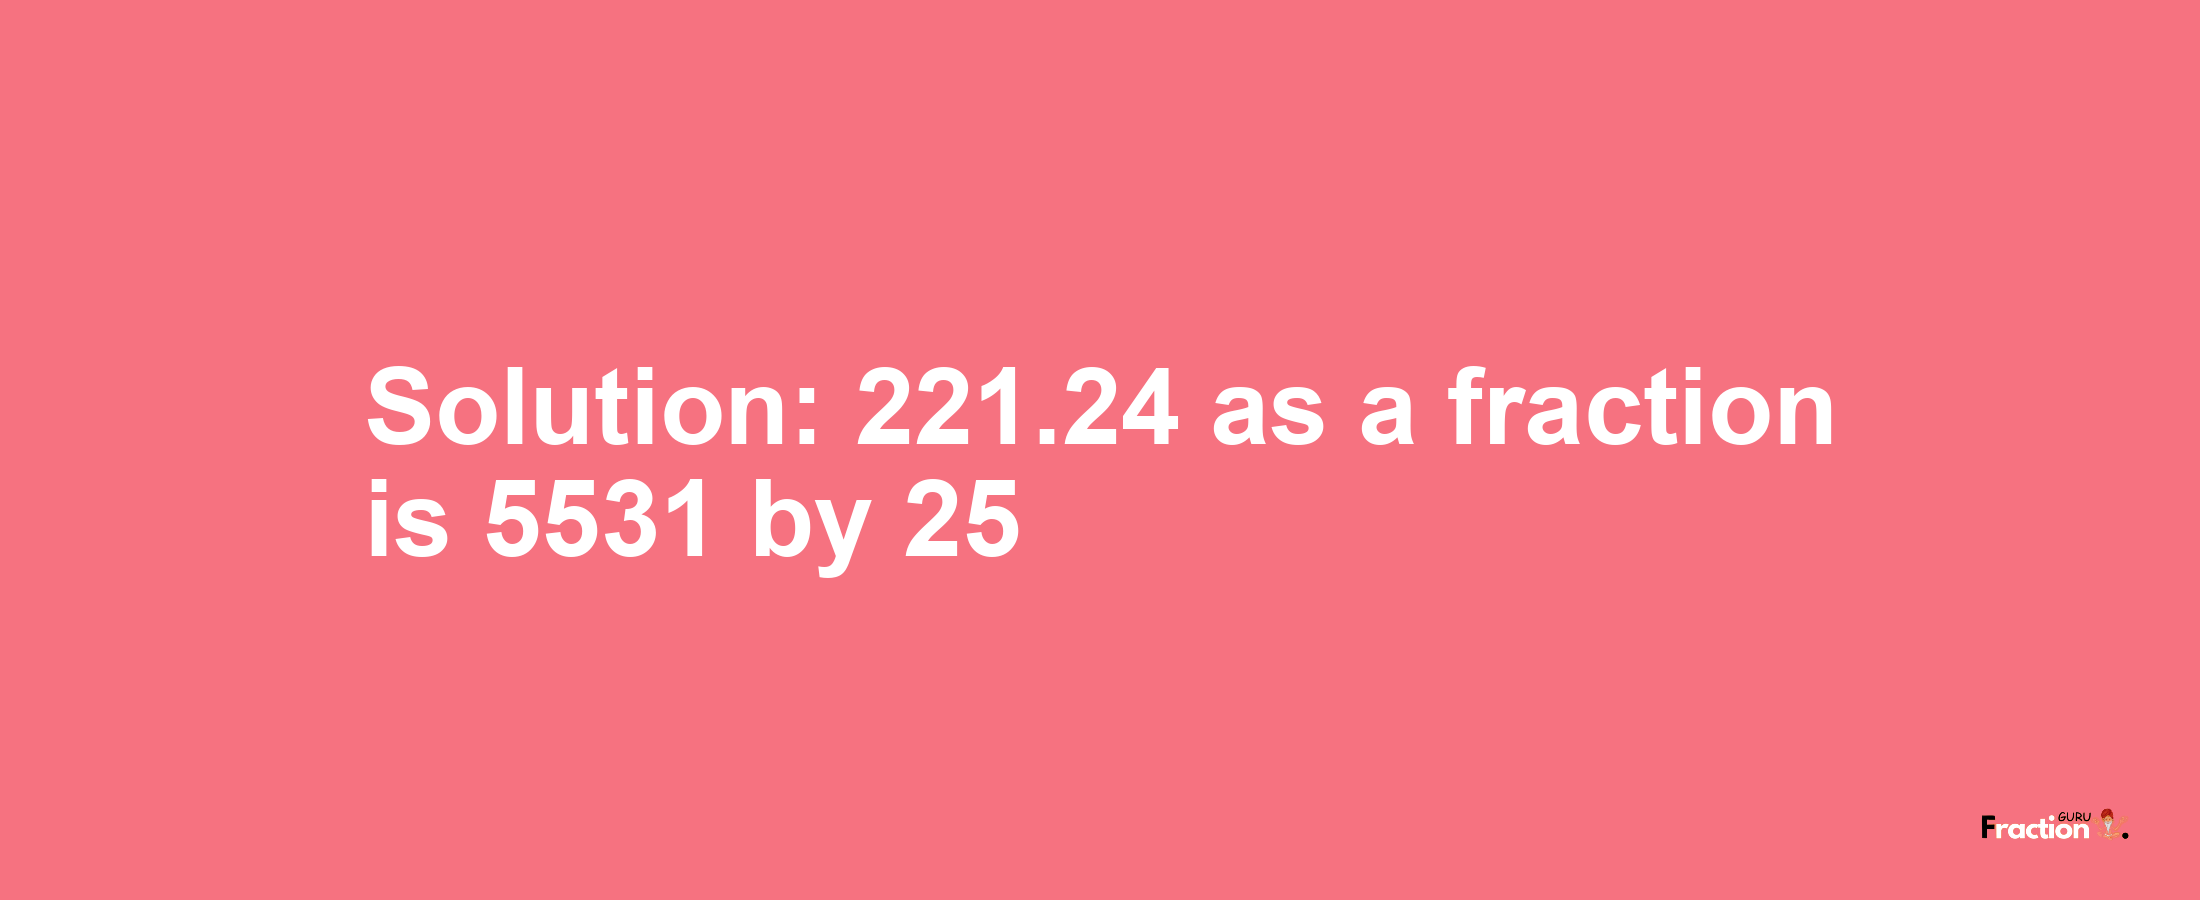 Solution:221.24 as a fraction is 5531/25